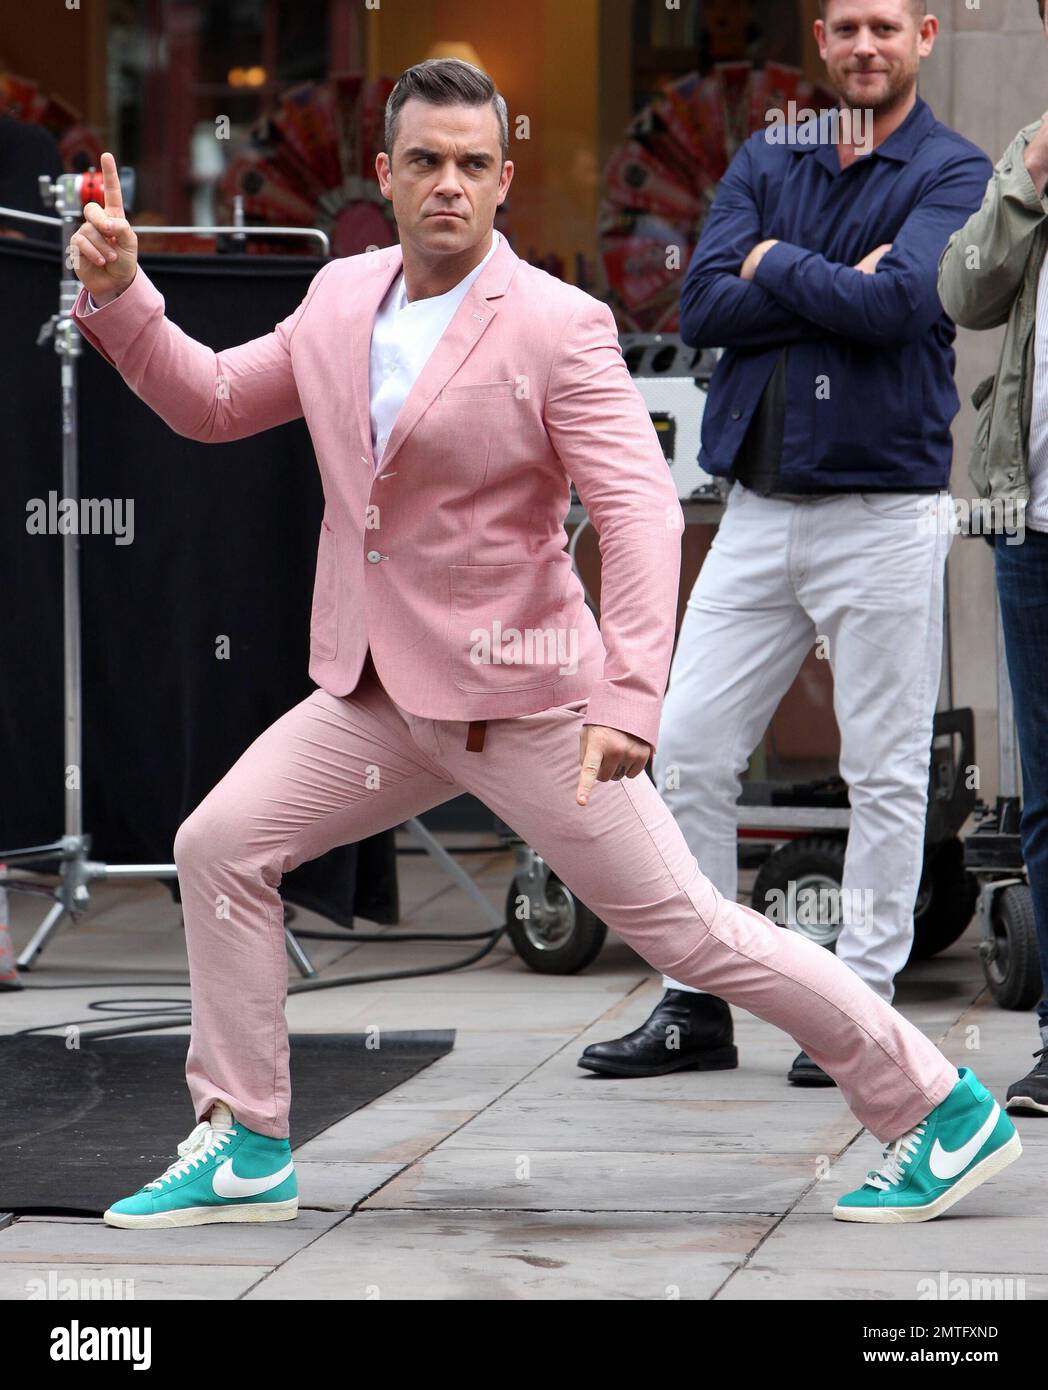 Wearing a pink suit with baby blue Nike sneakers, Robbie Williams and  'Skins' star Kaya Scodelario were spotted on set filming scenes for his new  music video in East London. According to